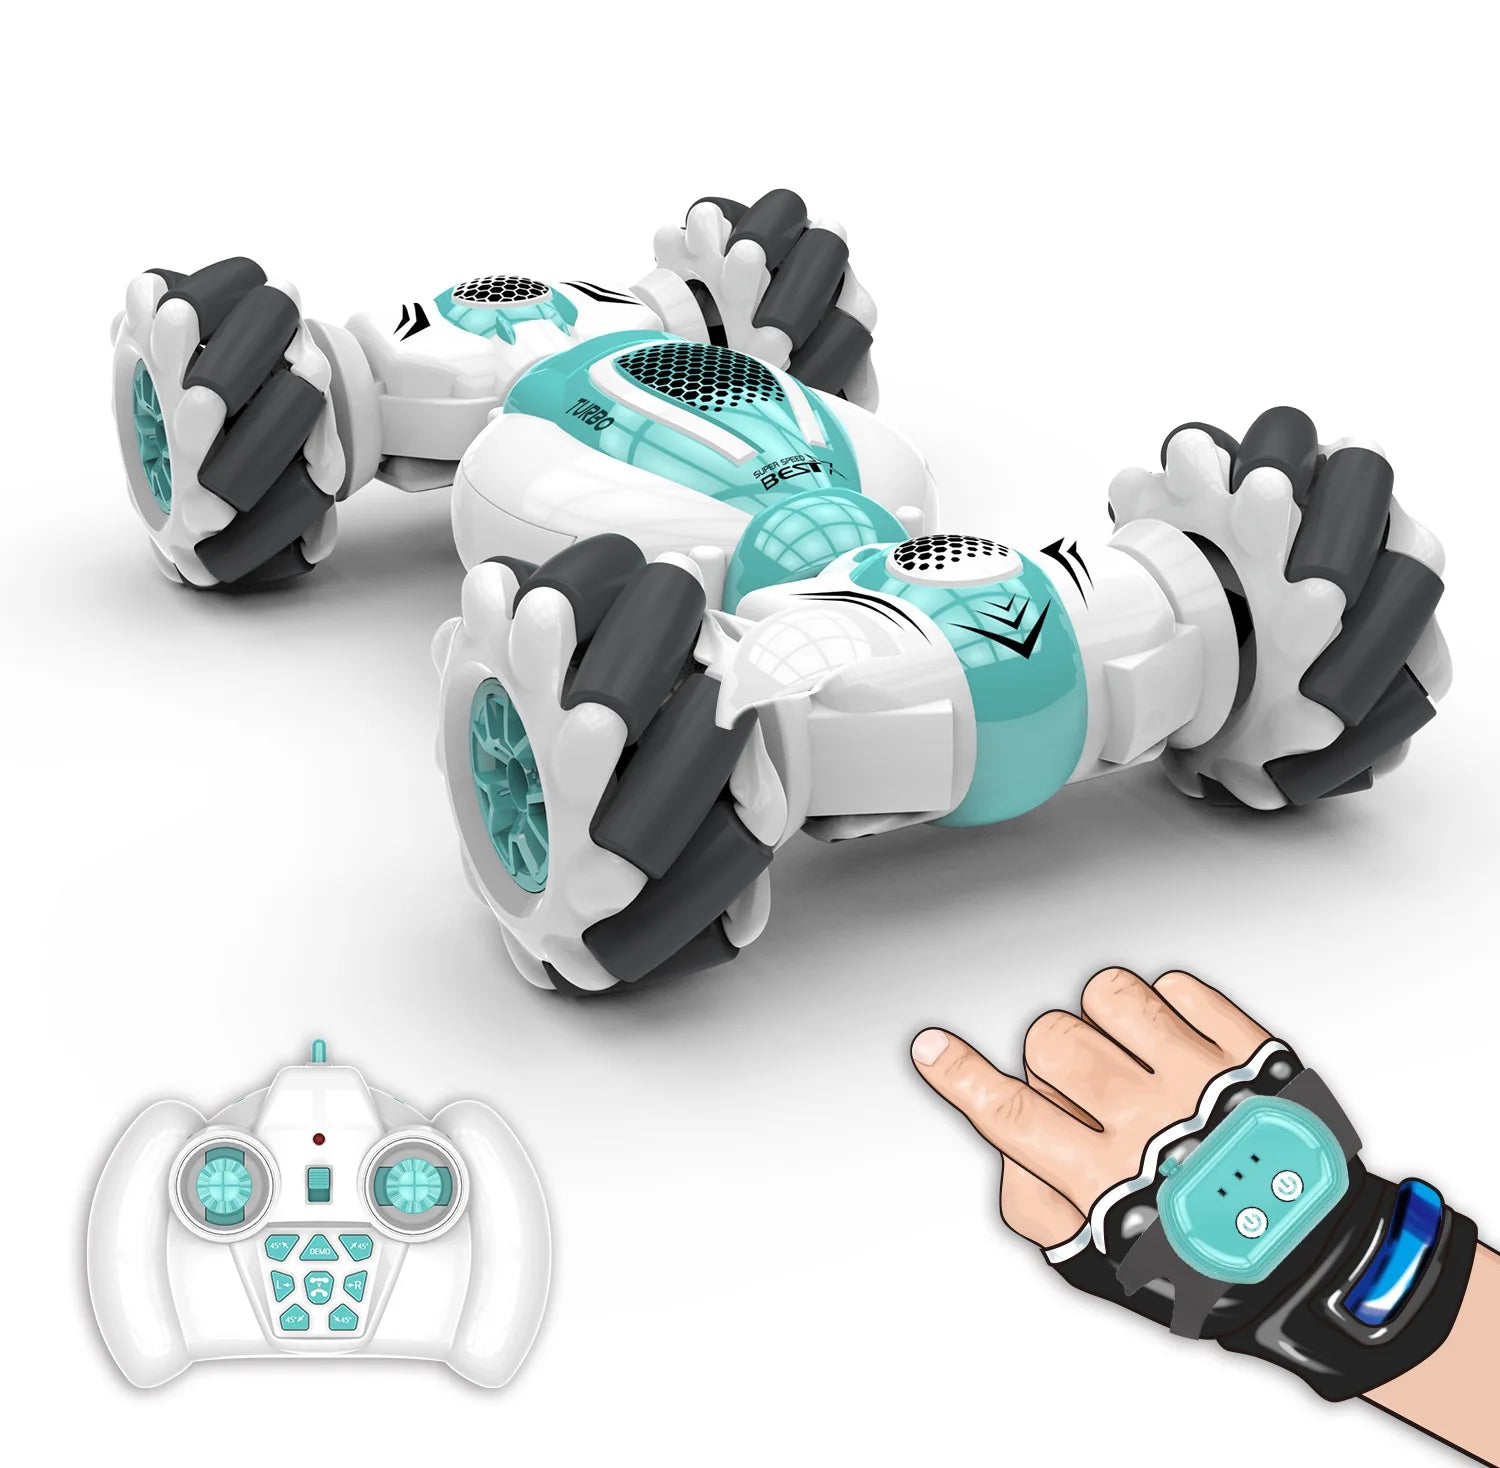 S-012 RC Stunt Car, * An ideal gift for boys and kids who like remote control toys